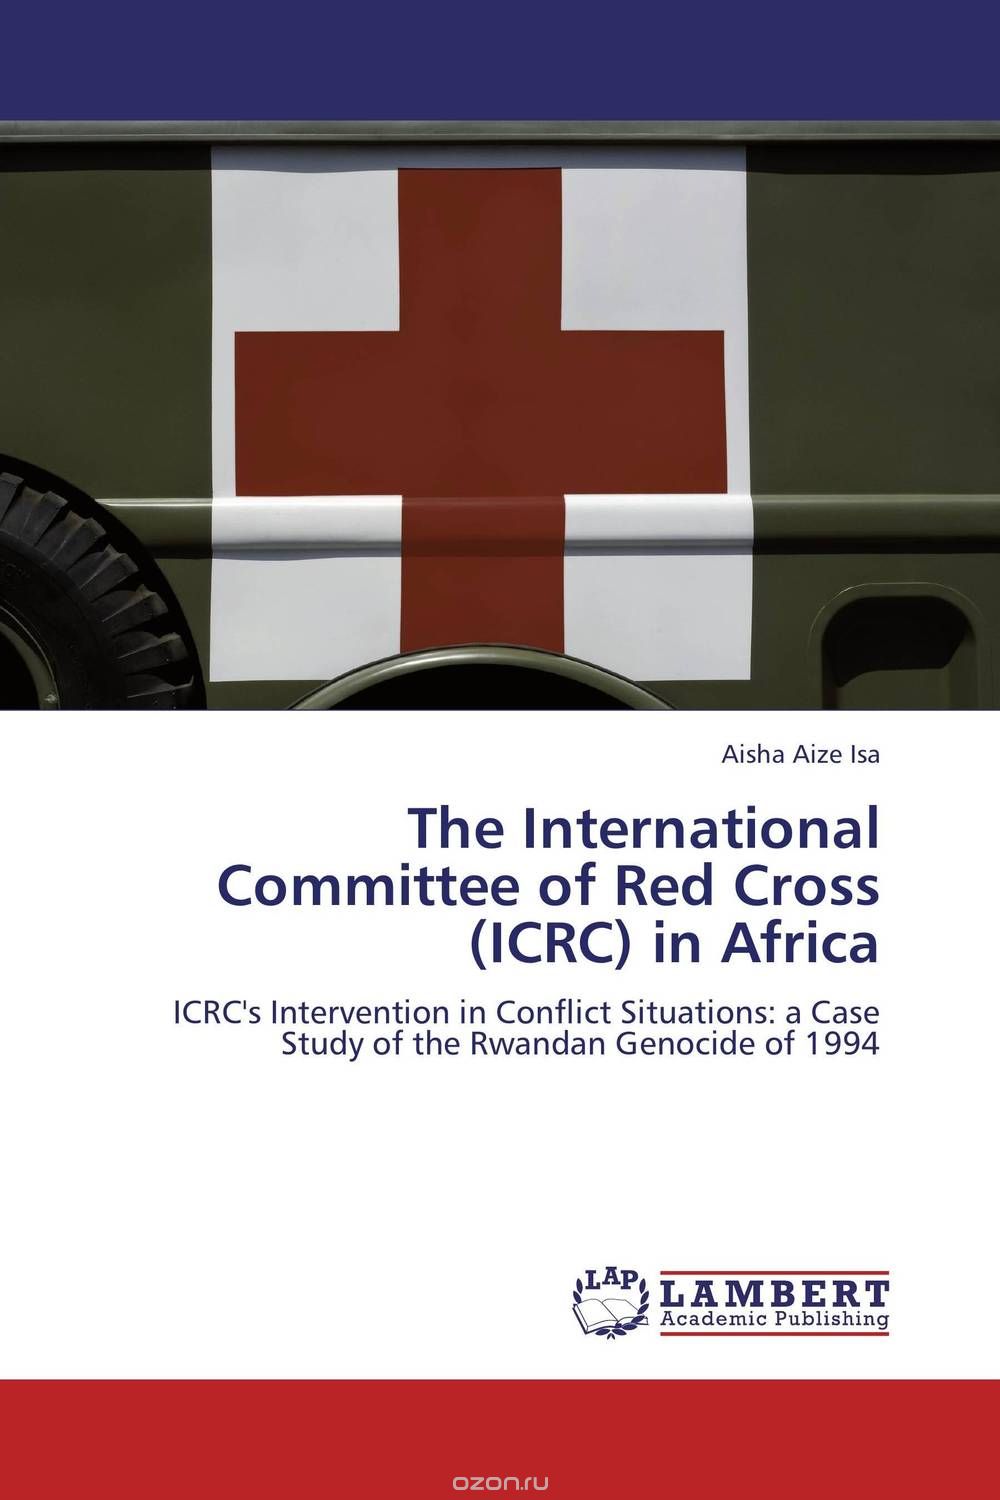 The International Committee of Red Cross (ICRC) in Africa